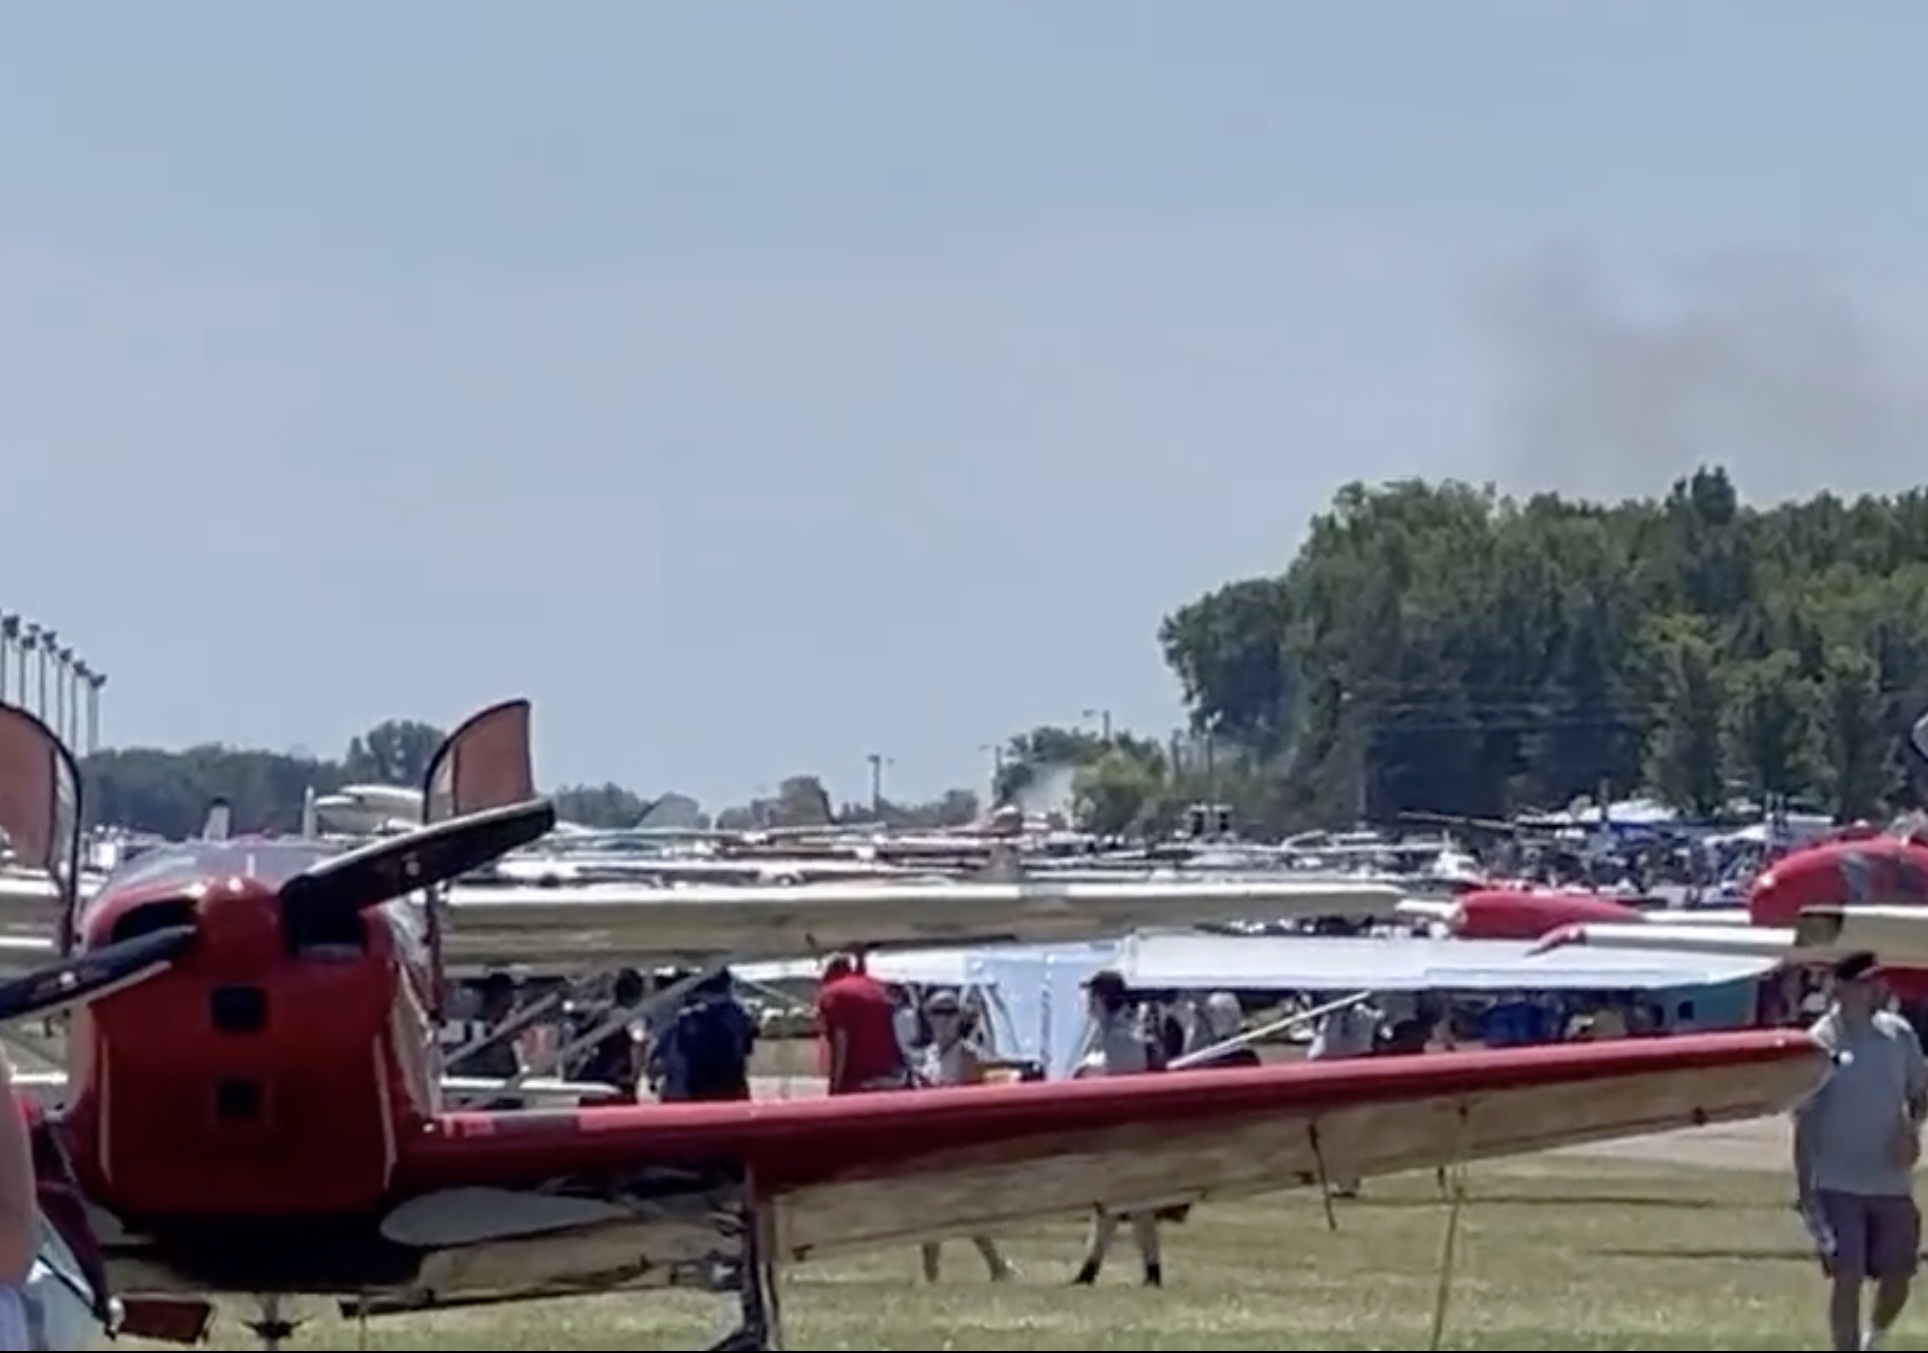 MidAir Collision at EAA AirVenture Event Results in Two Fatalities